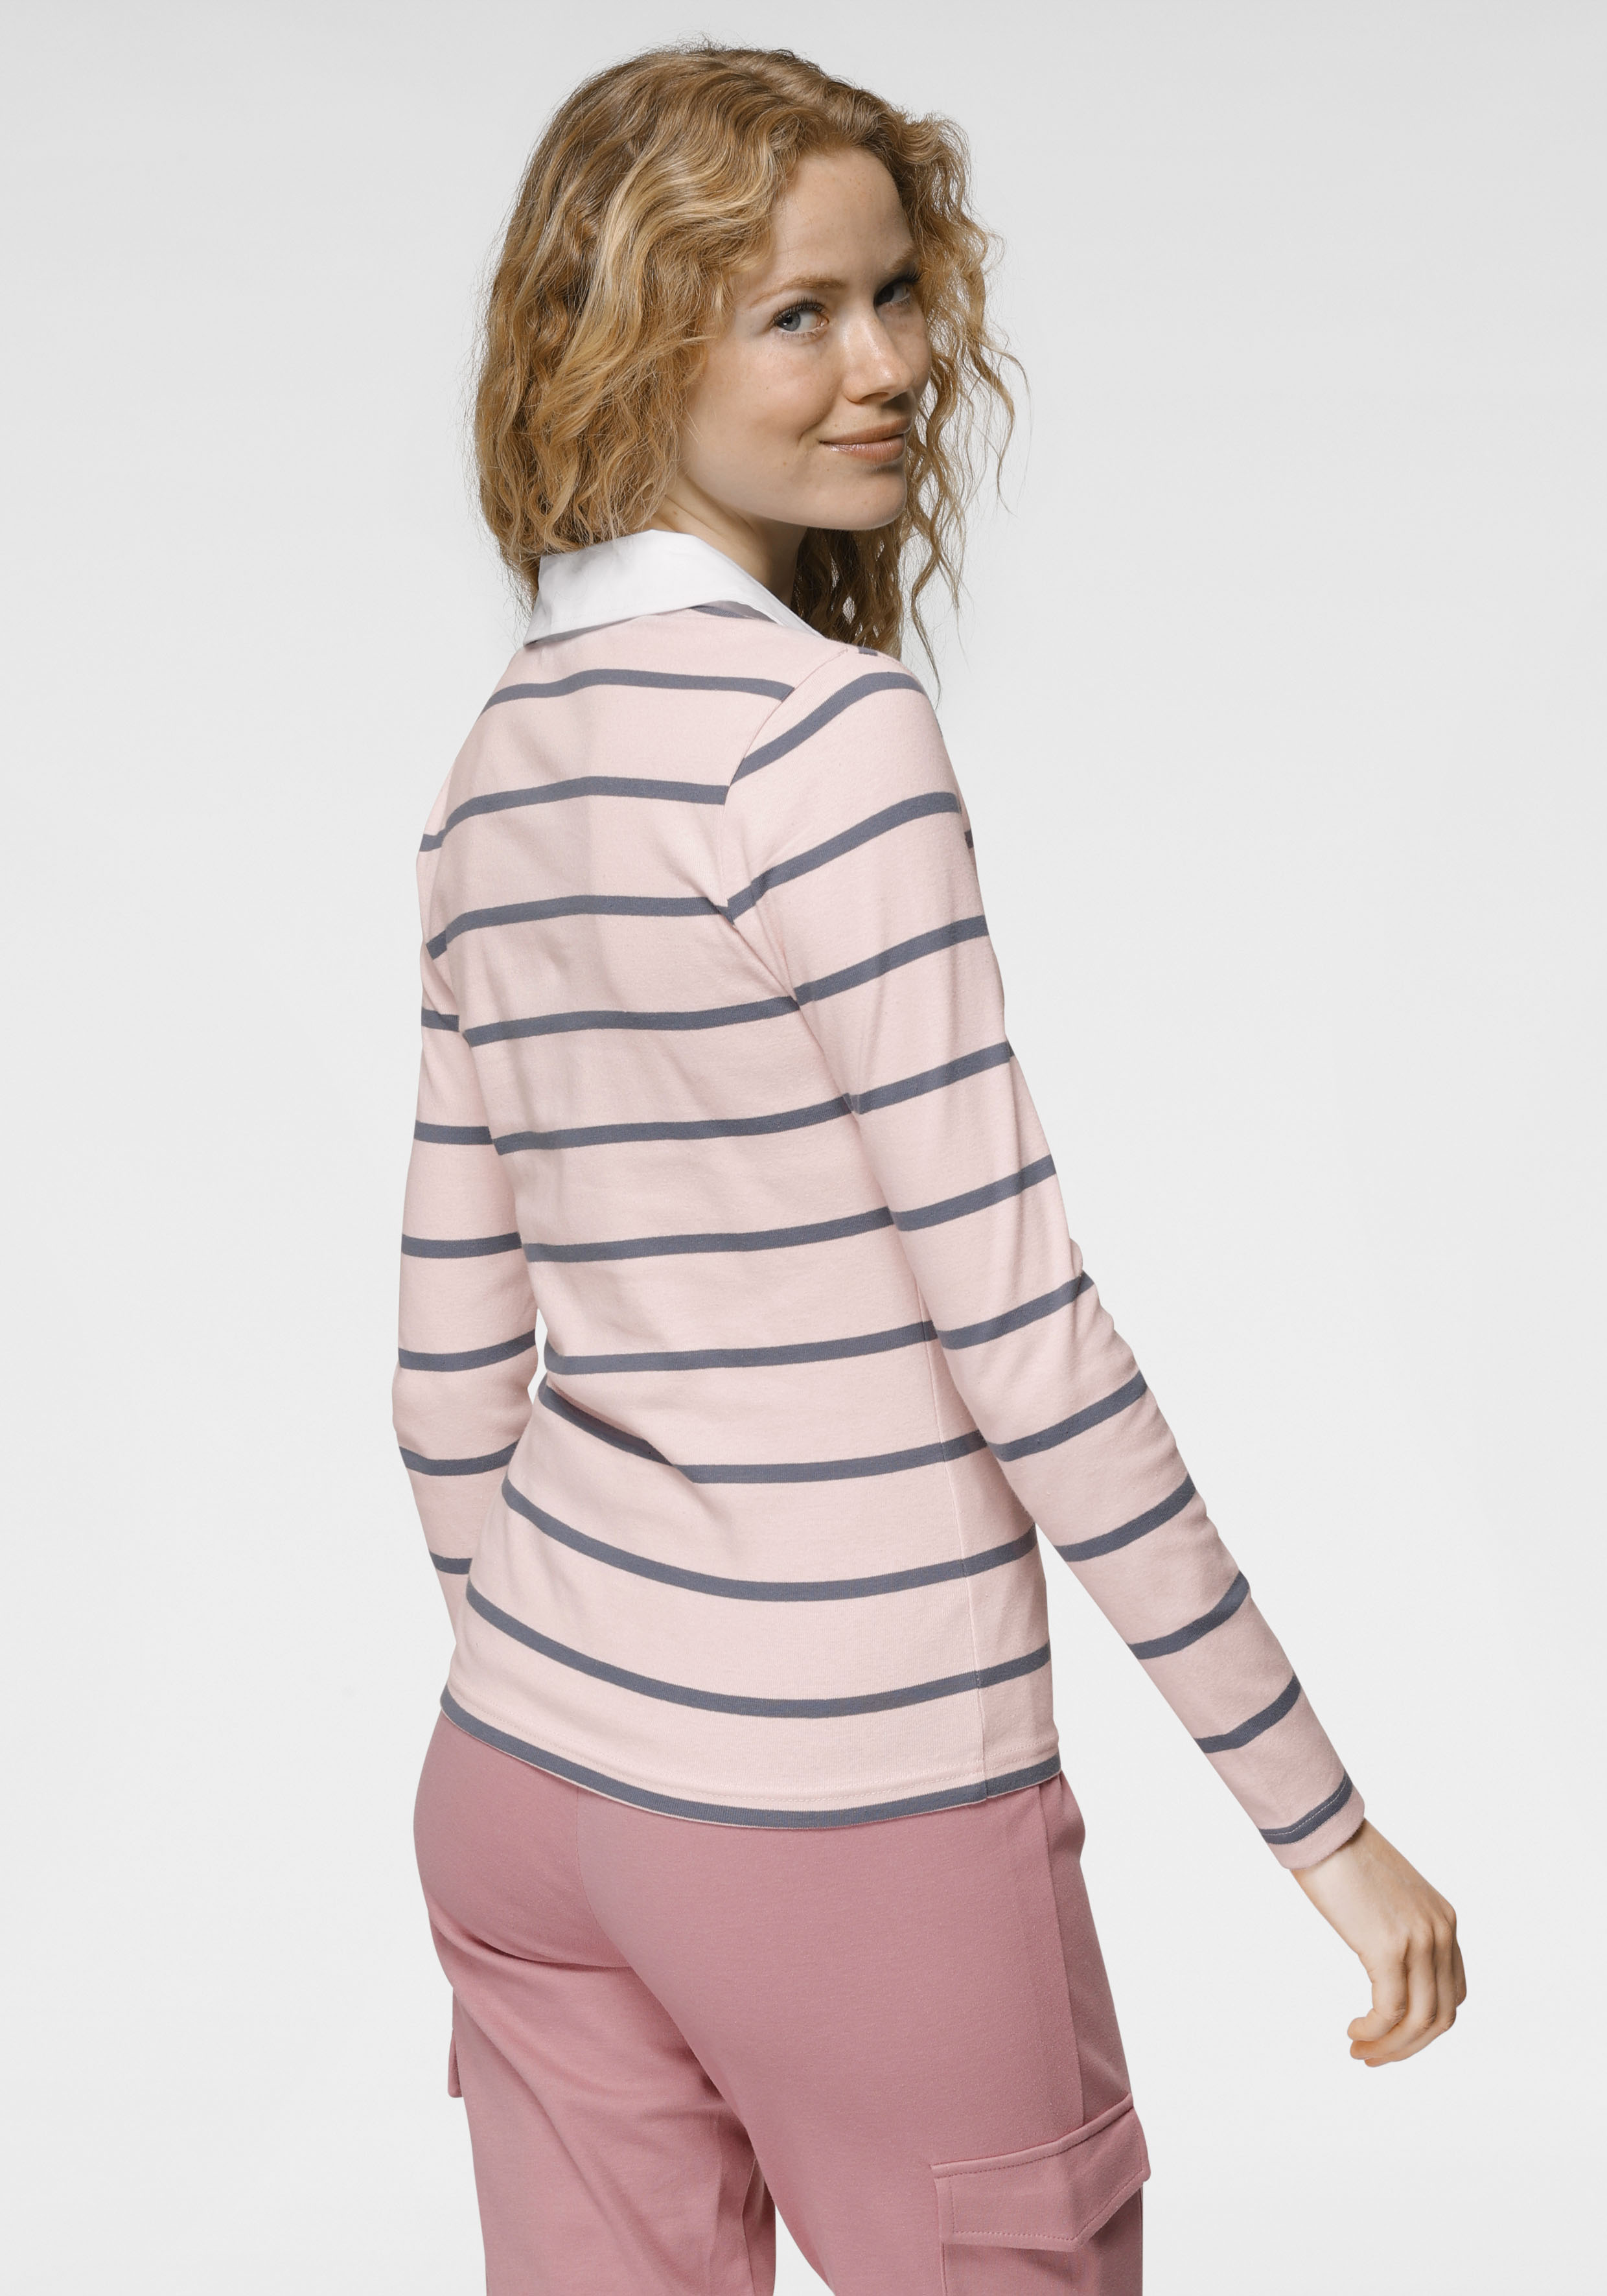 Tom Tailor Polo Team Shirt in Pink 